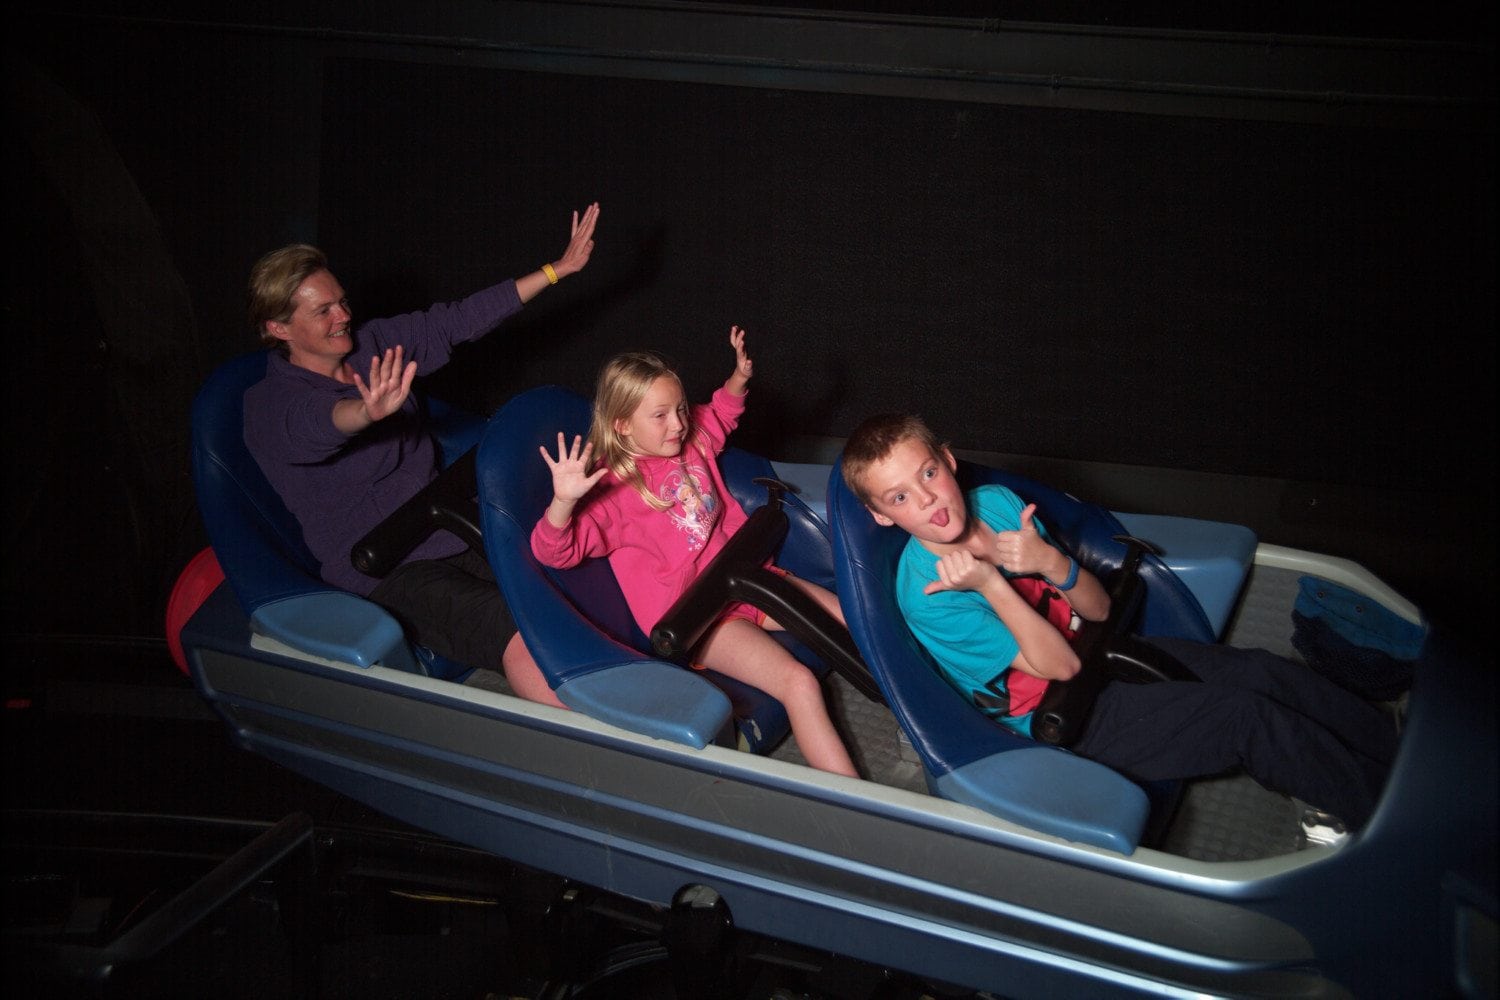 Flash Photography In Indoor Attractions.